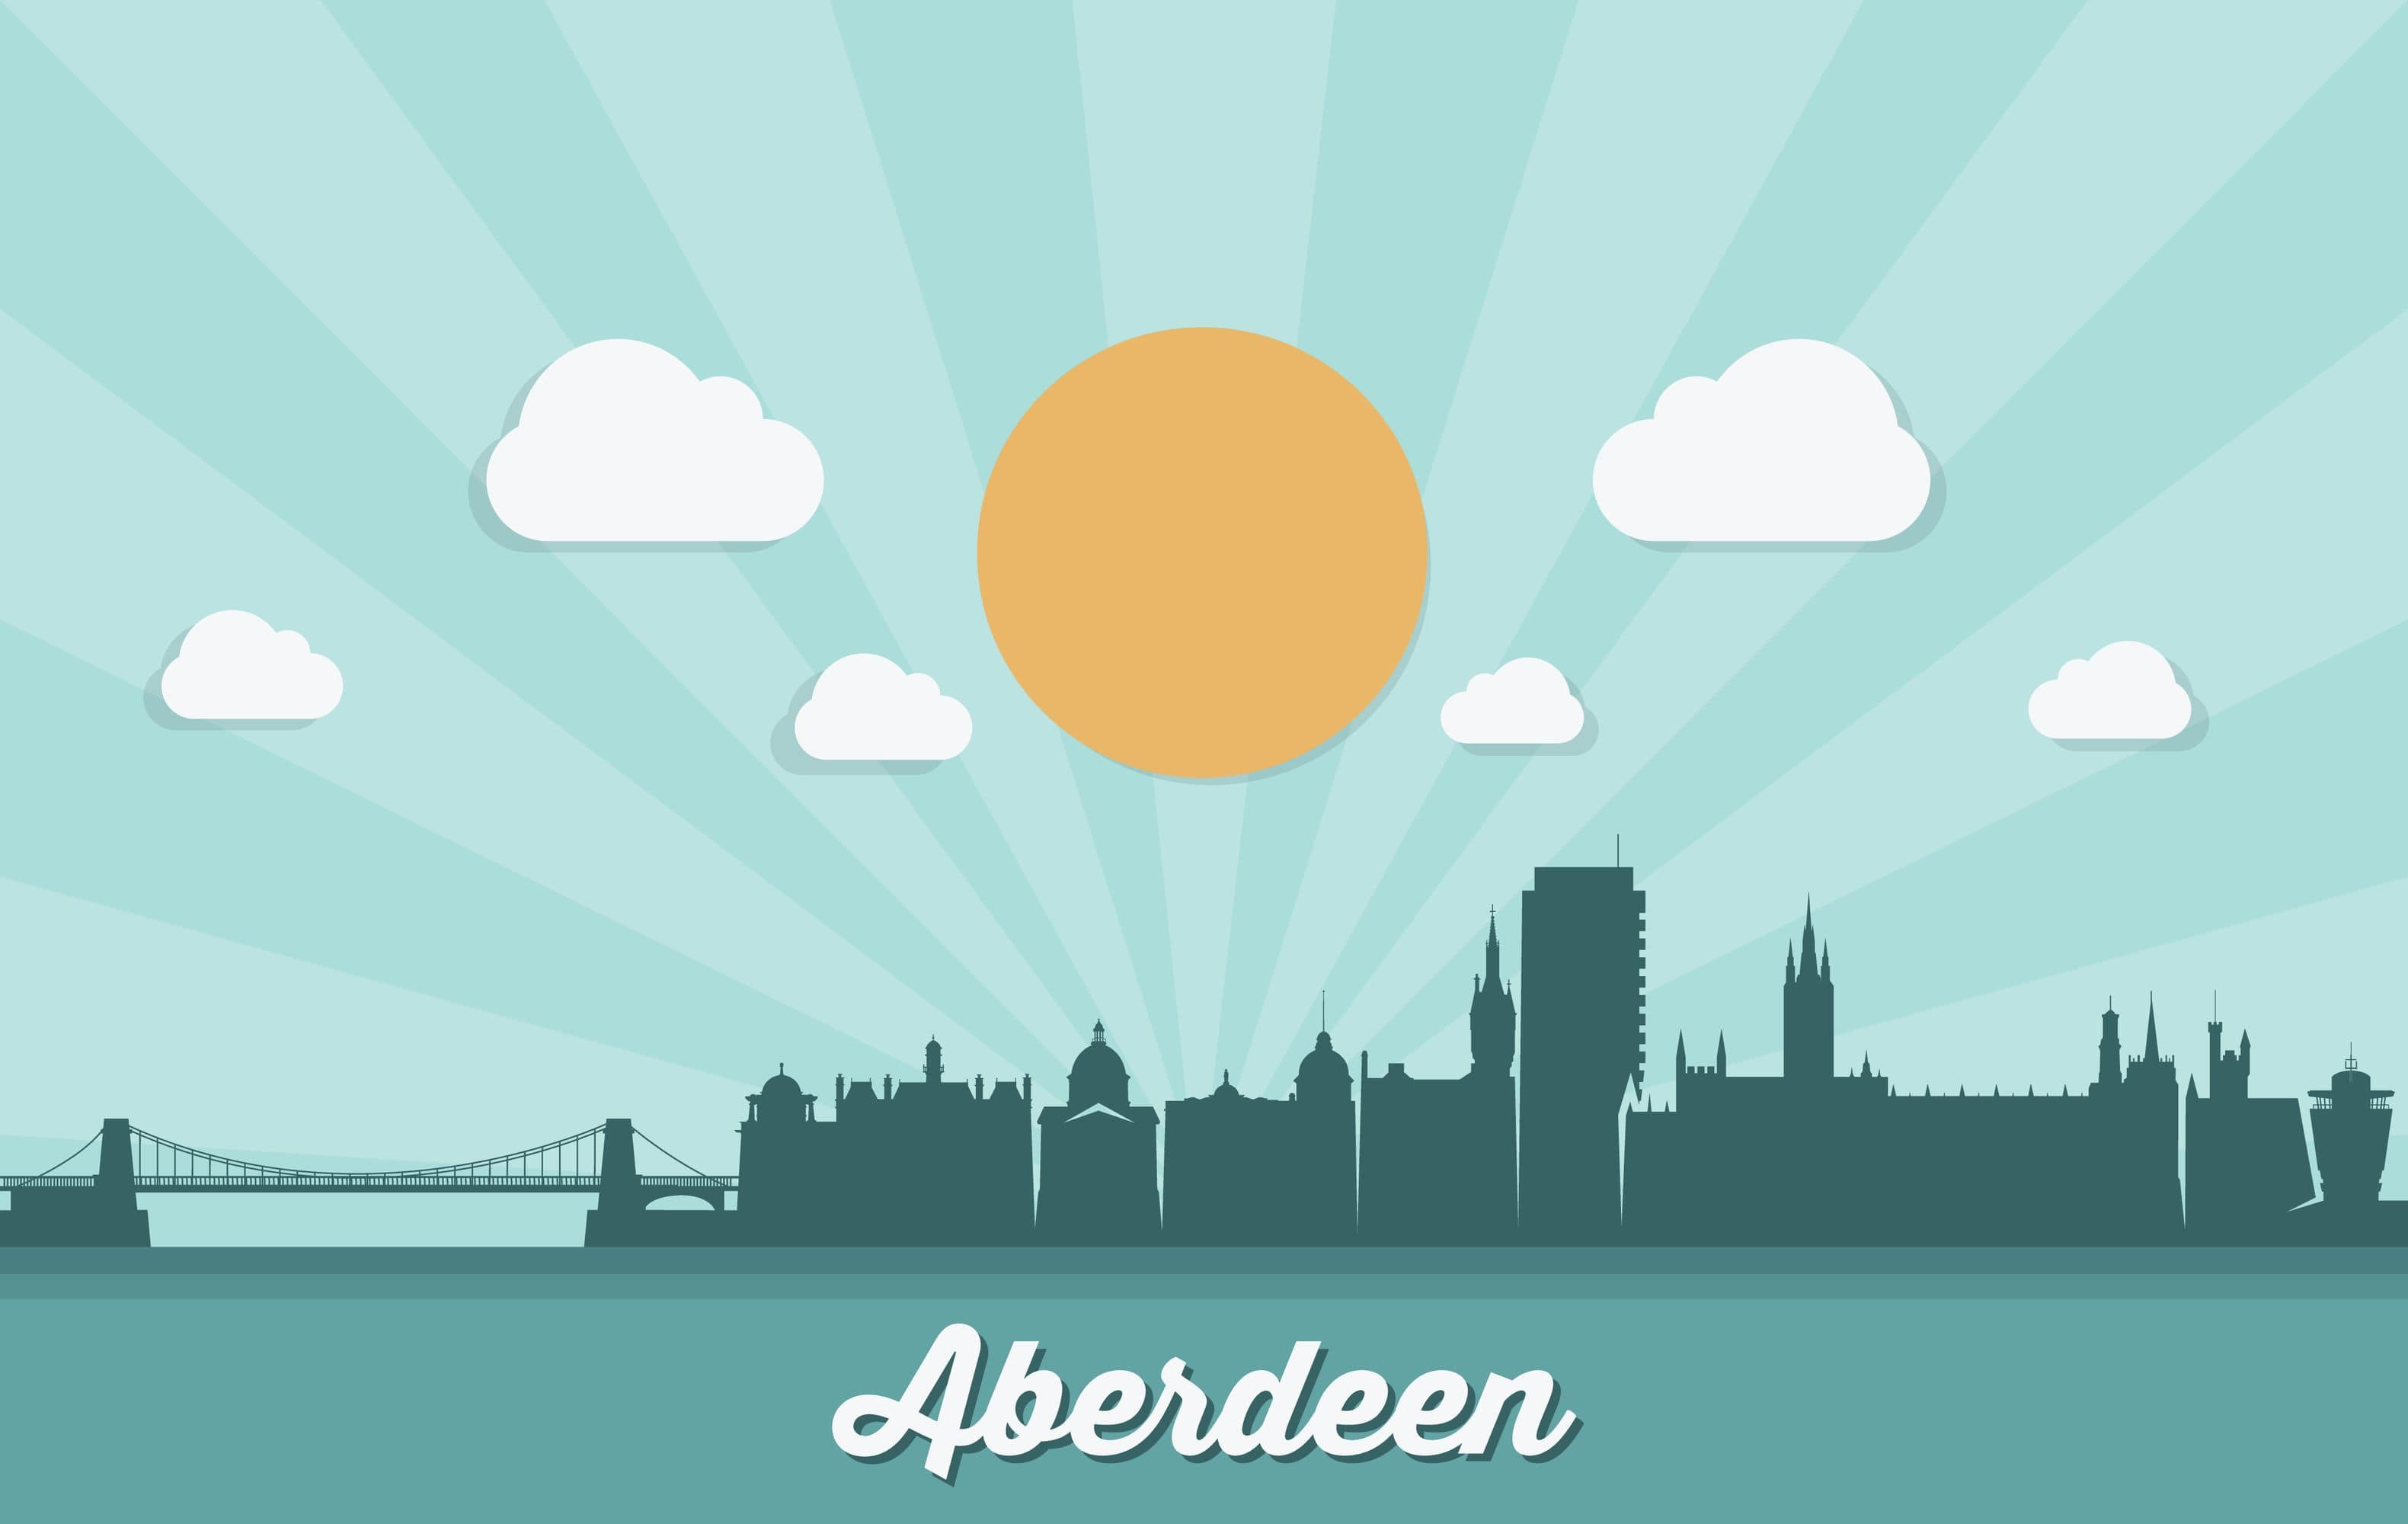 Why live in Aberdeen